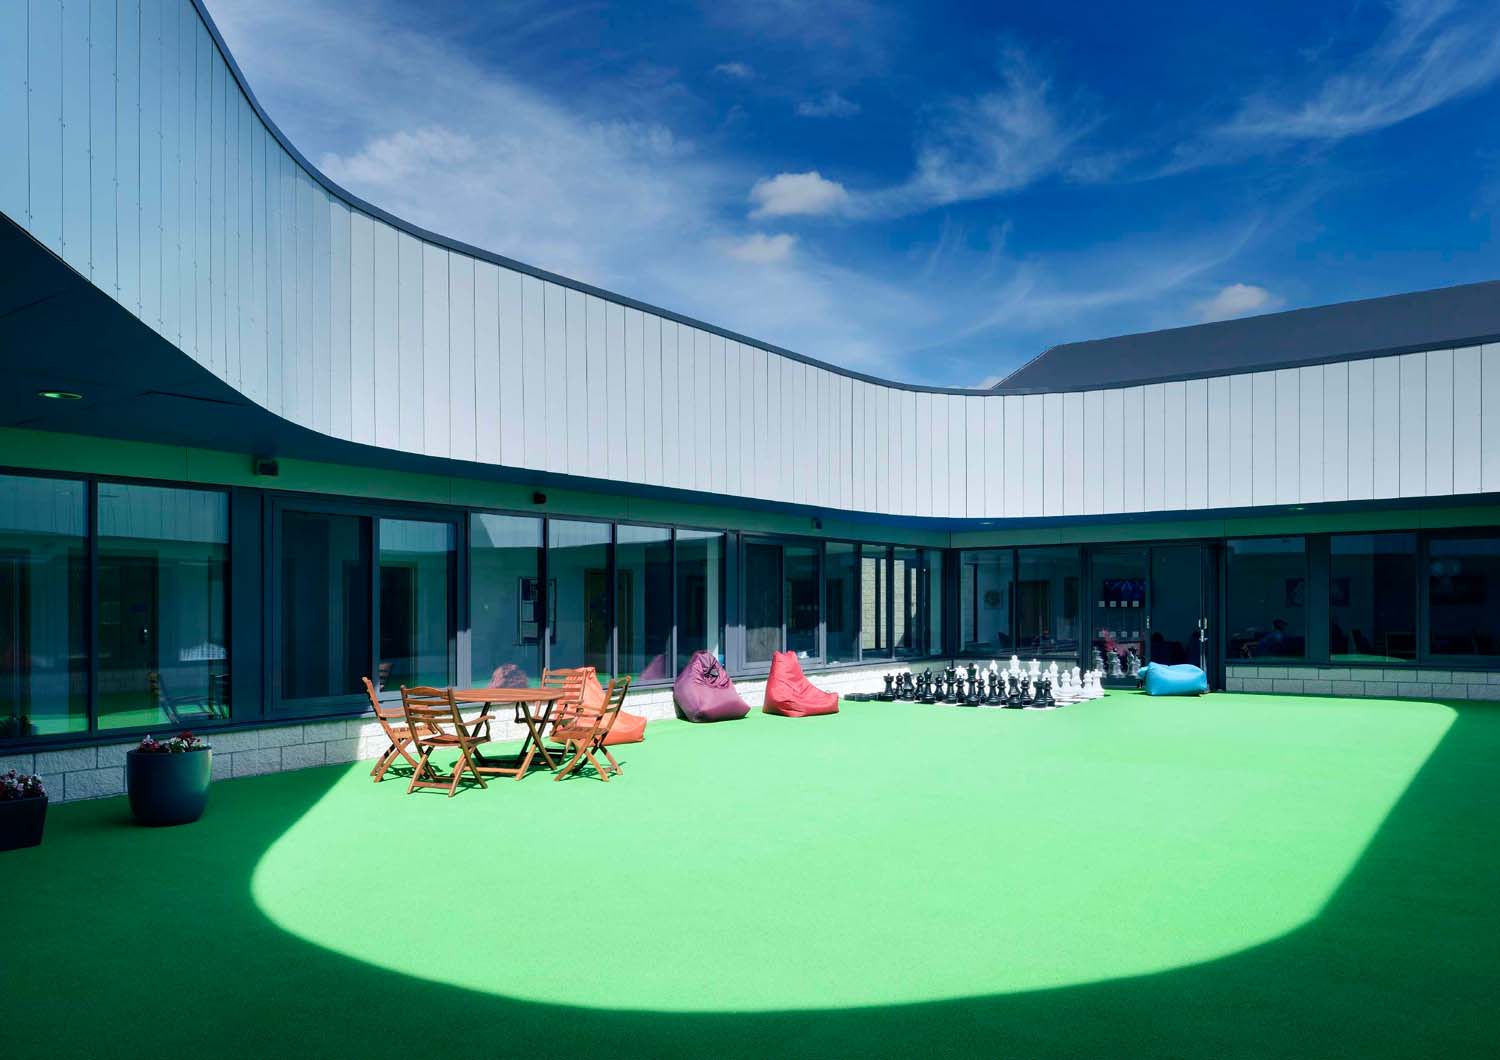 An internal courtyard with a green floor, chairs, bean bags and a giant outdoor chess set. The courtyard is surrounded by a glass wall.